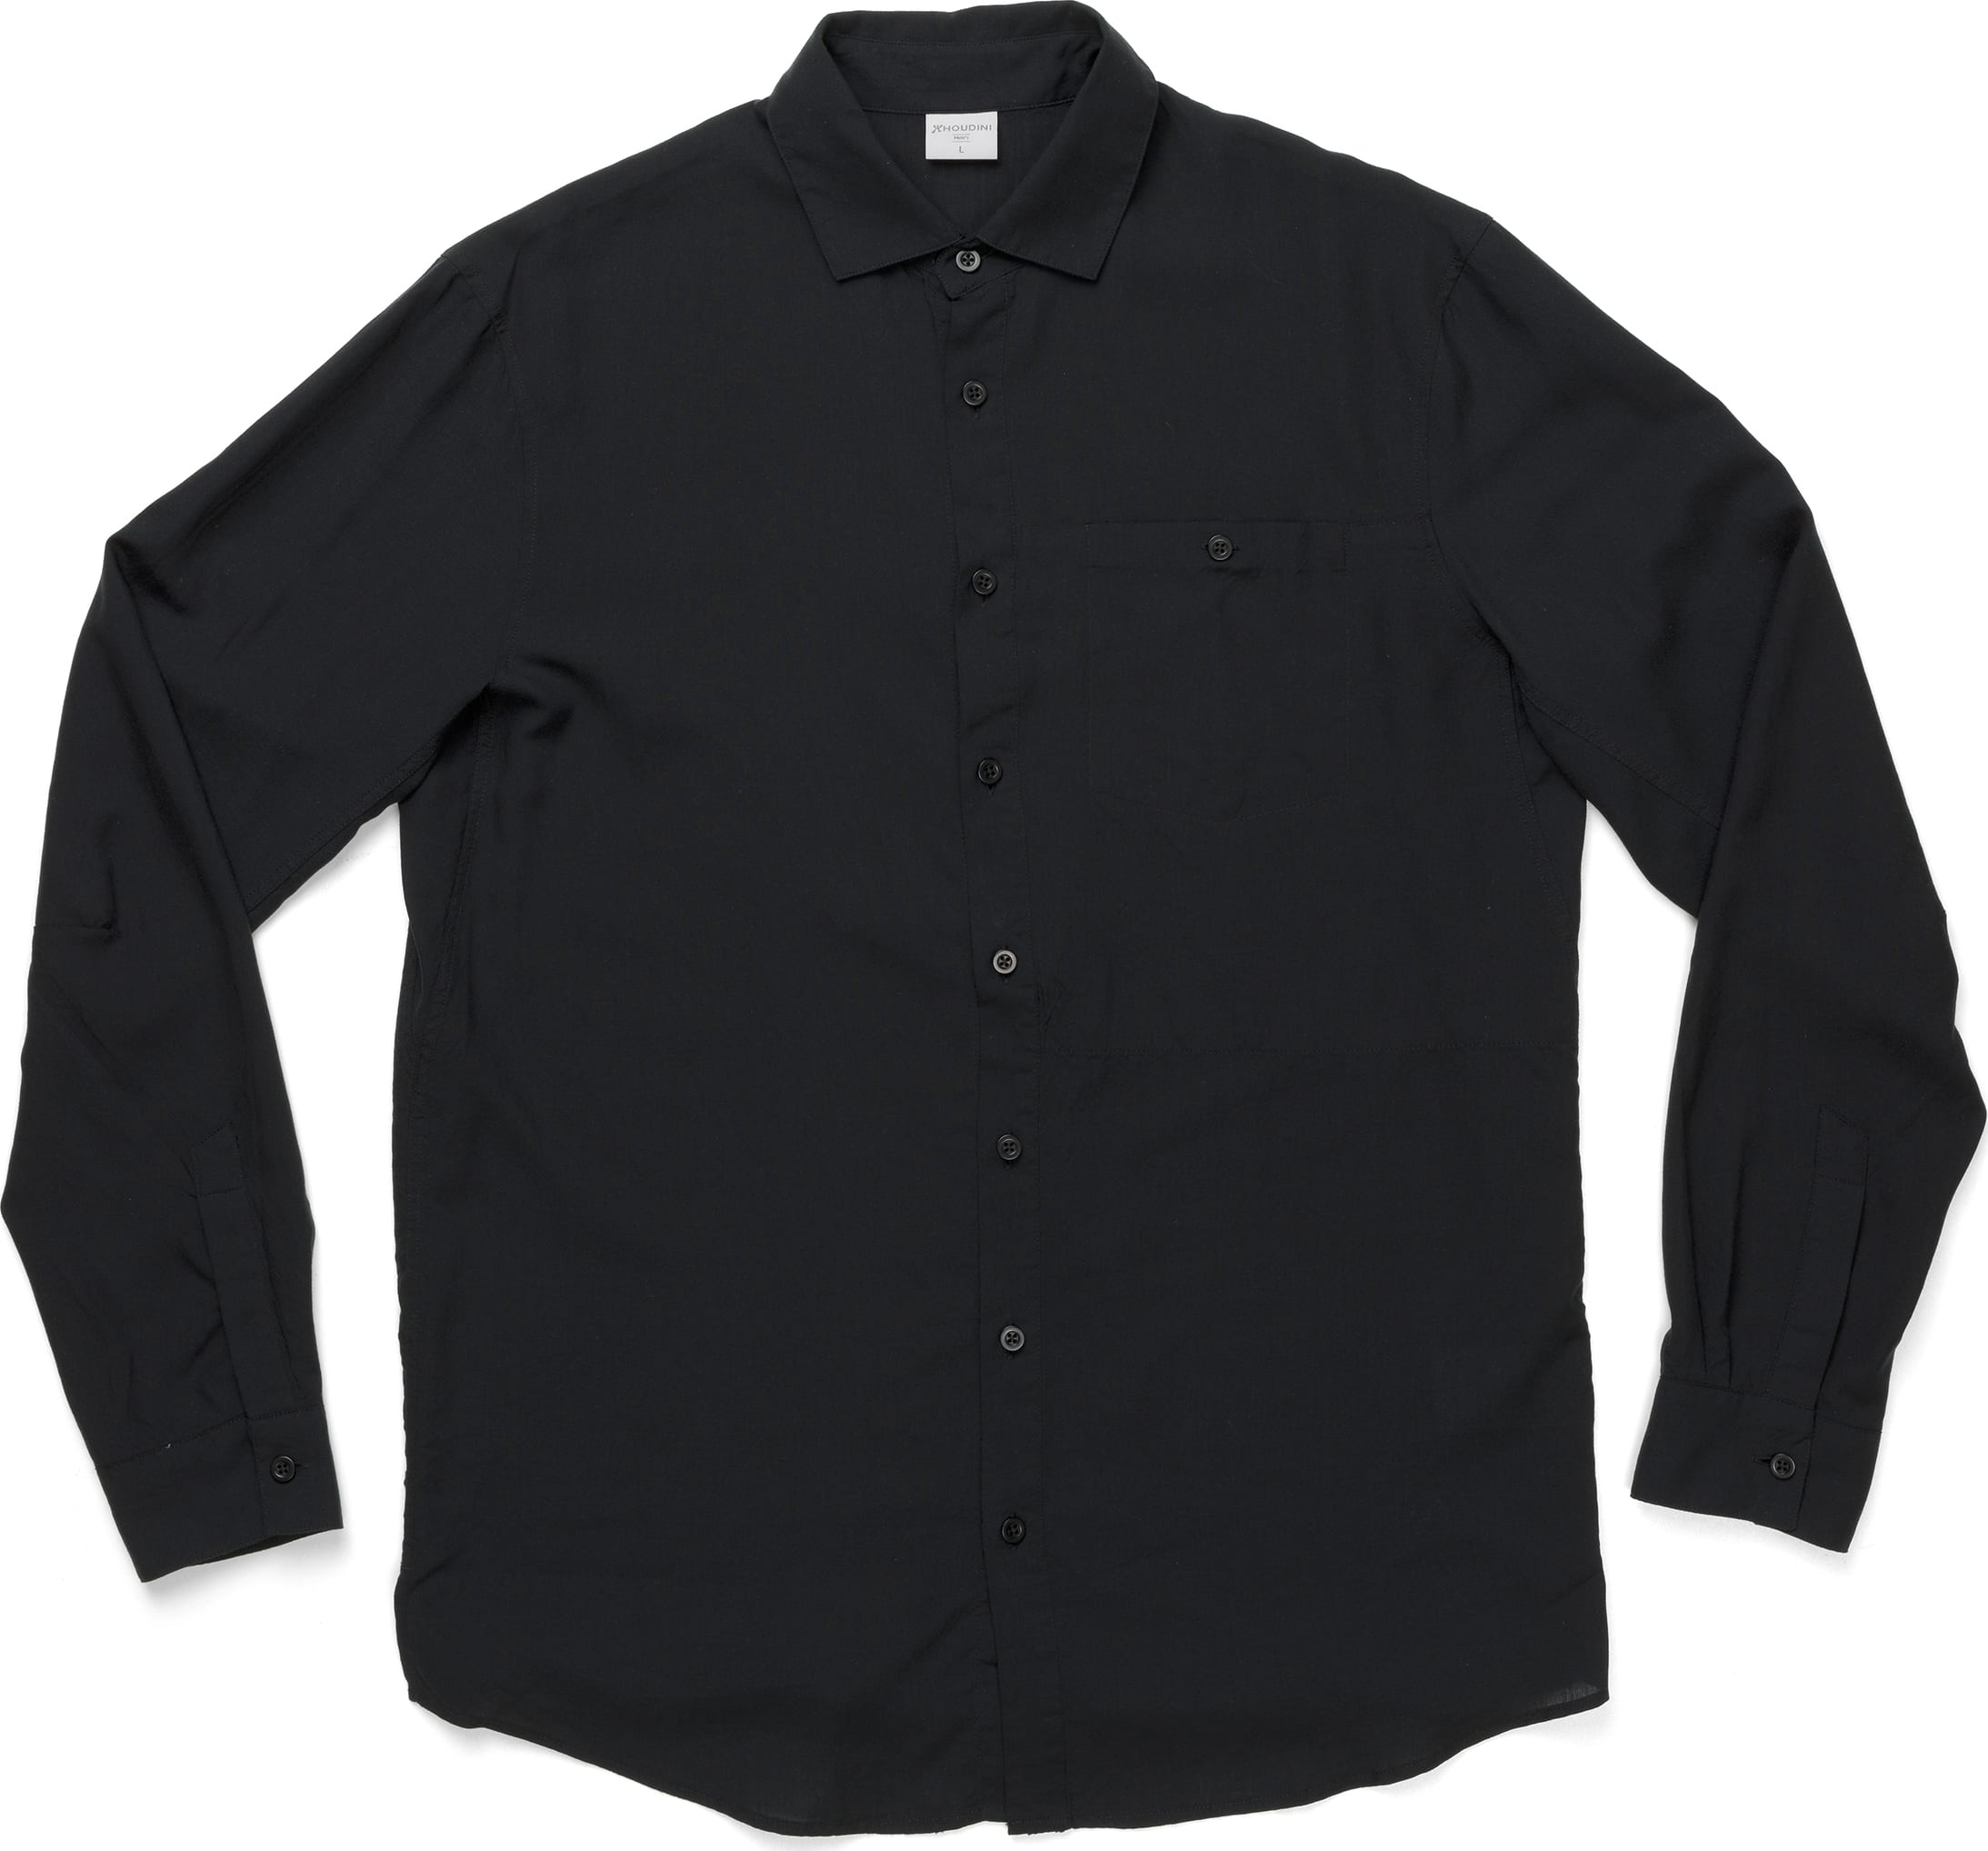 Buy Houdini Men's Tree Longsleeve Shirt from Outnorth